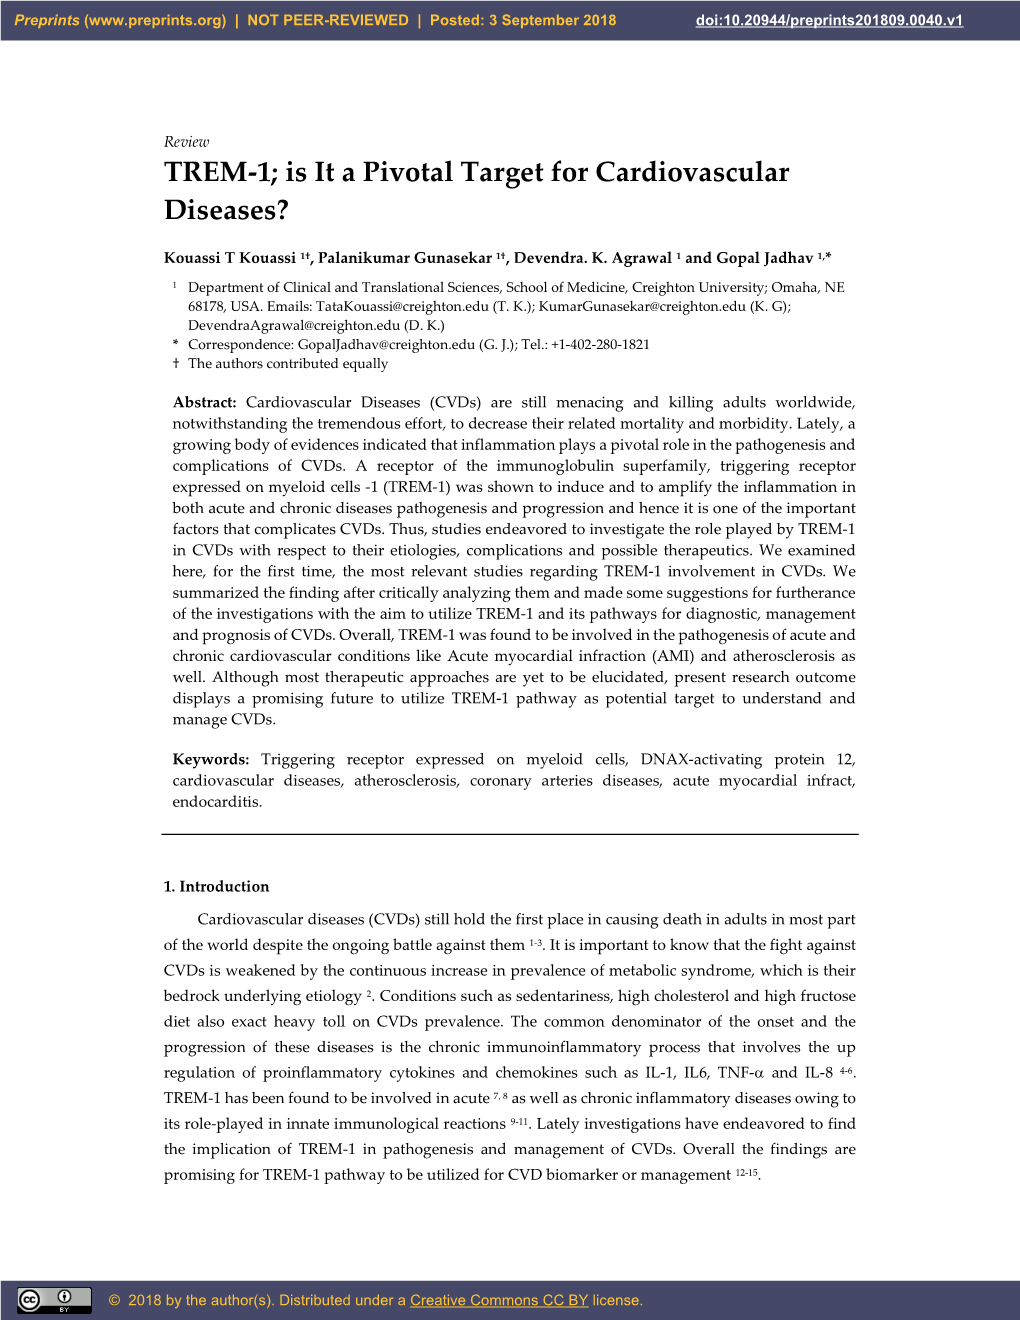 TREM-1; Is It a Pivotal Target for Cardiovascular Diseases?